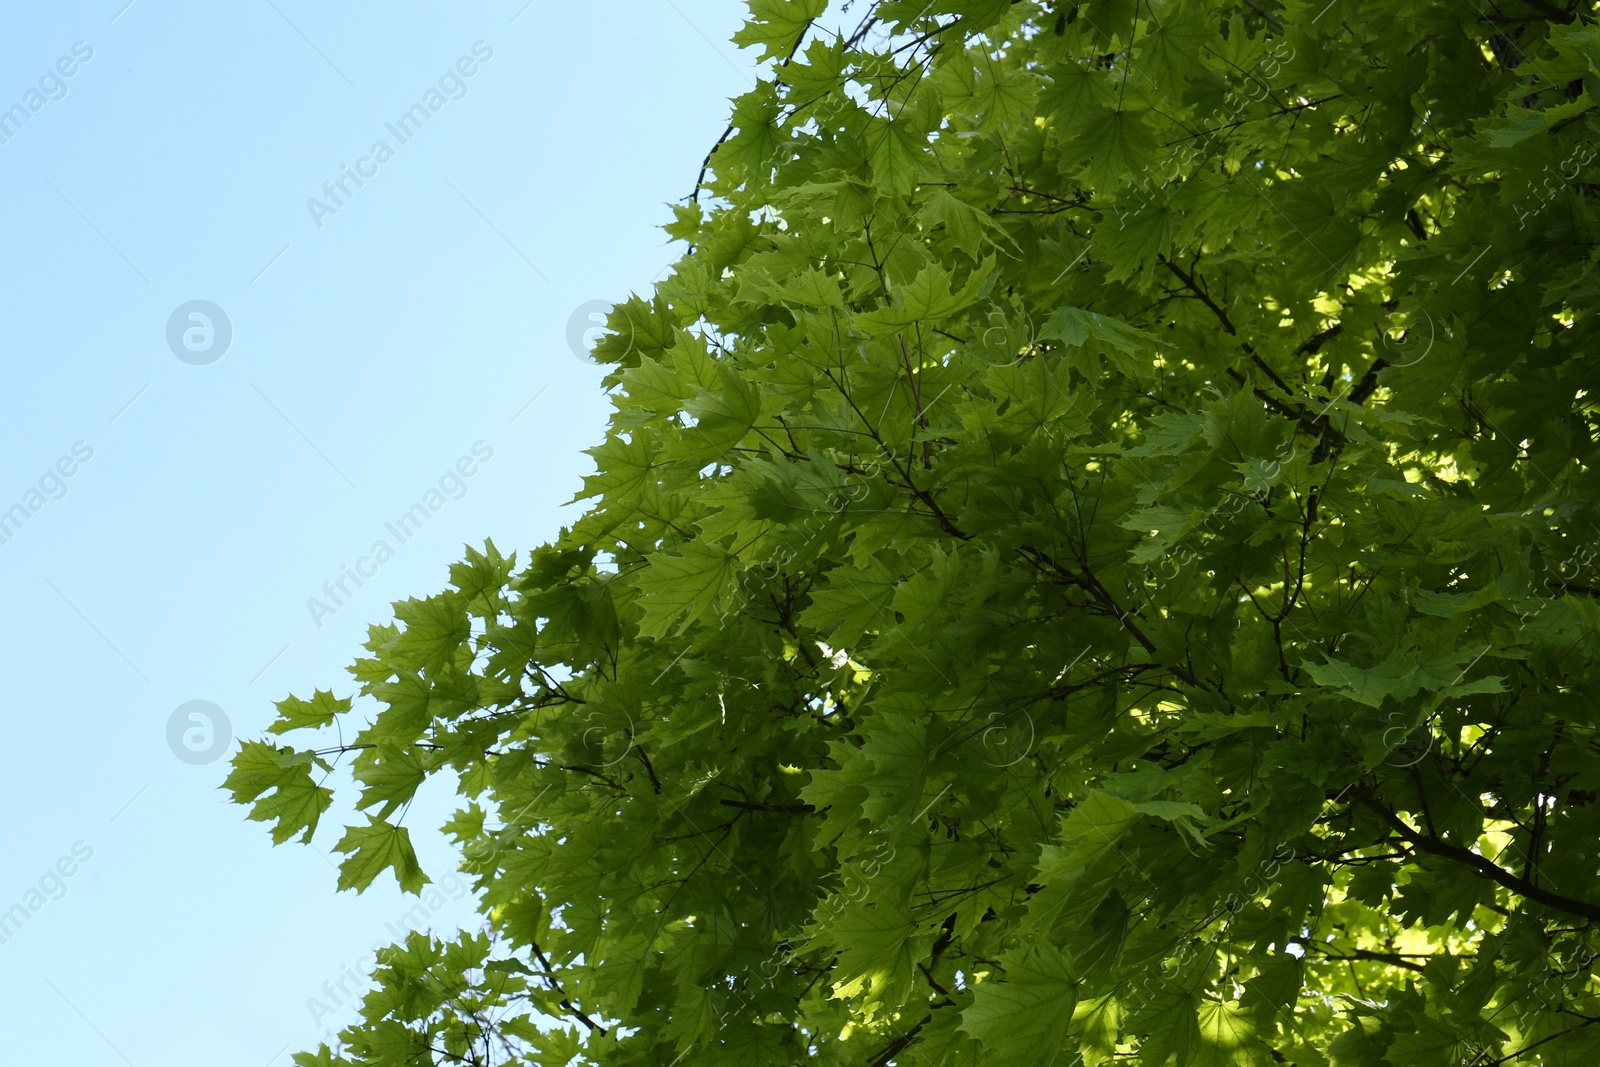 Photo of Beautiful maple tree with green leaves against blue sky, low angle view